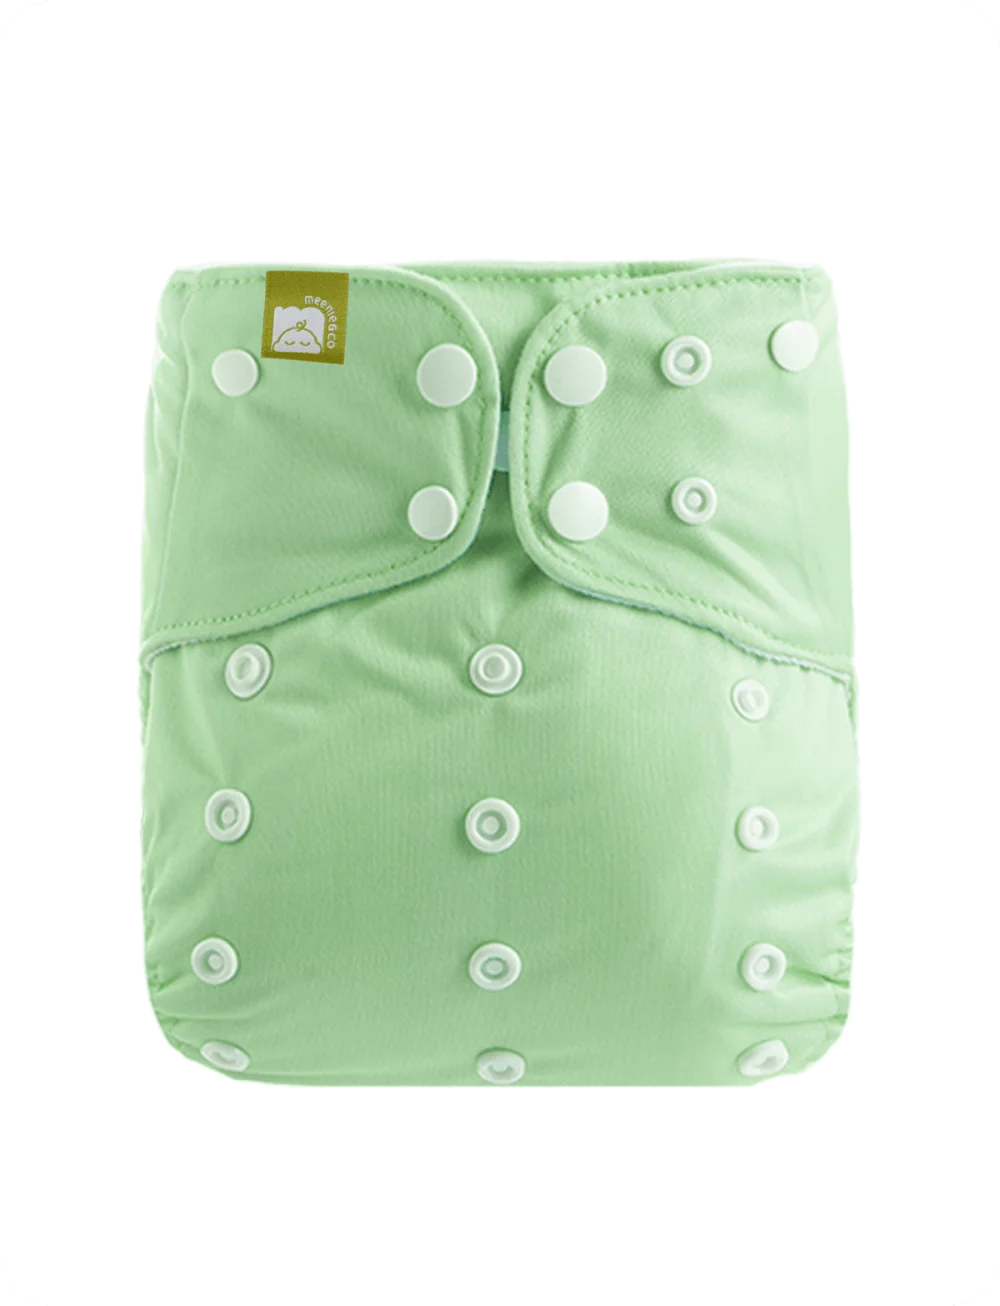 Meenie & Co. Single Gusset Cloth Diaper with Microfiber Reusable Insert